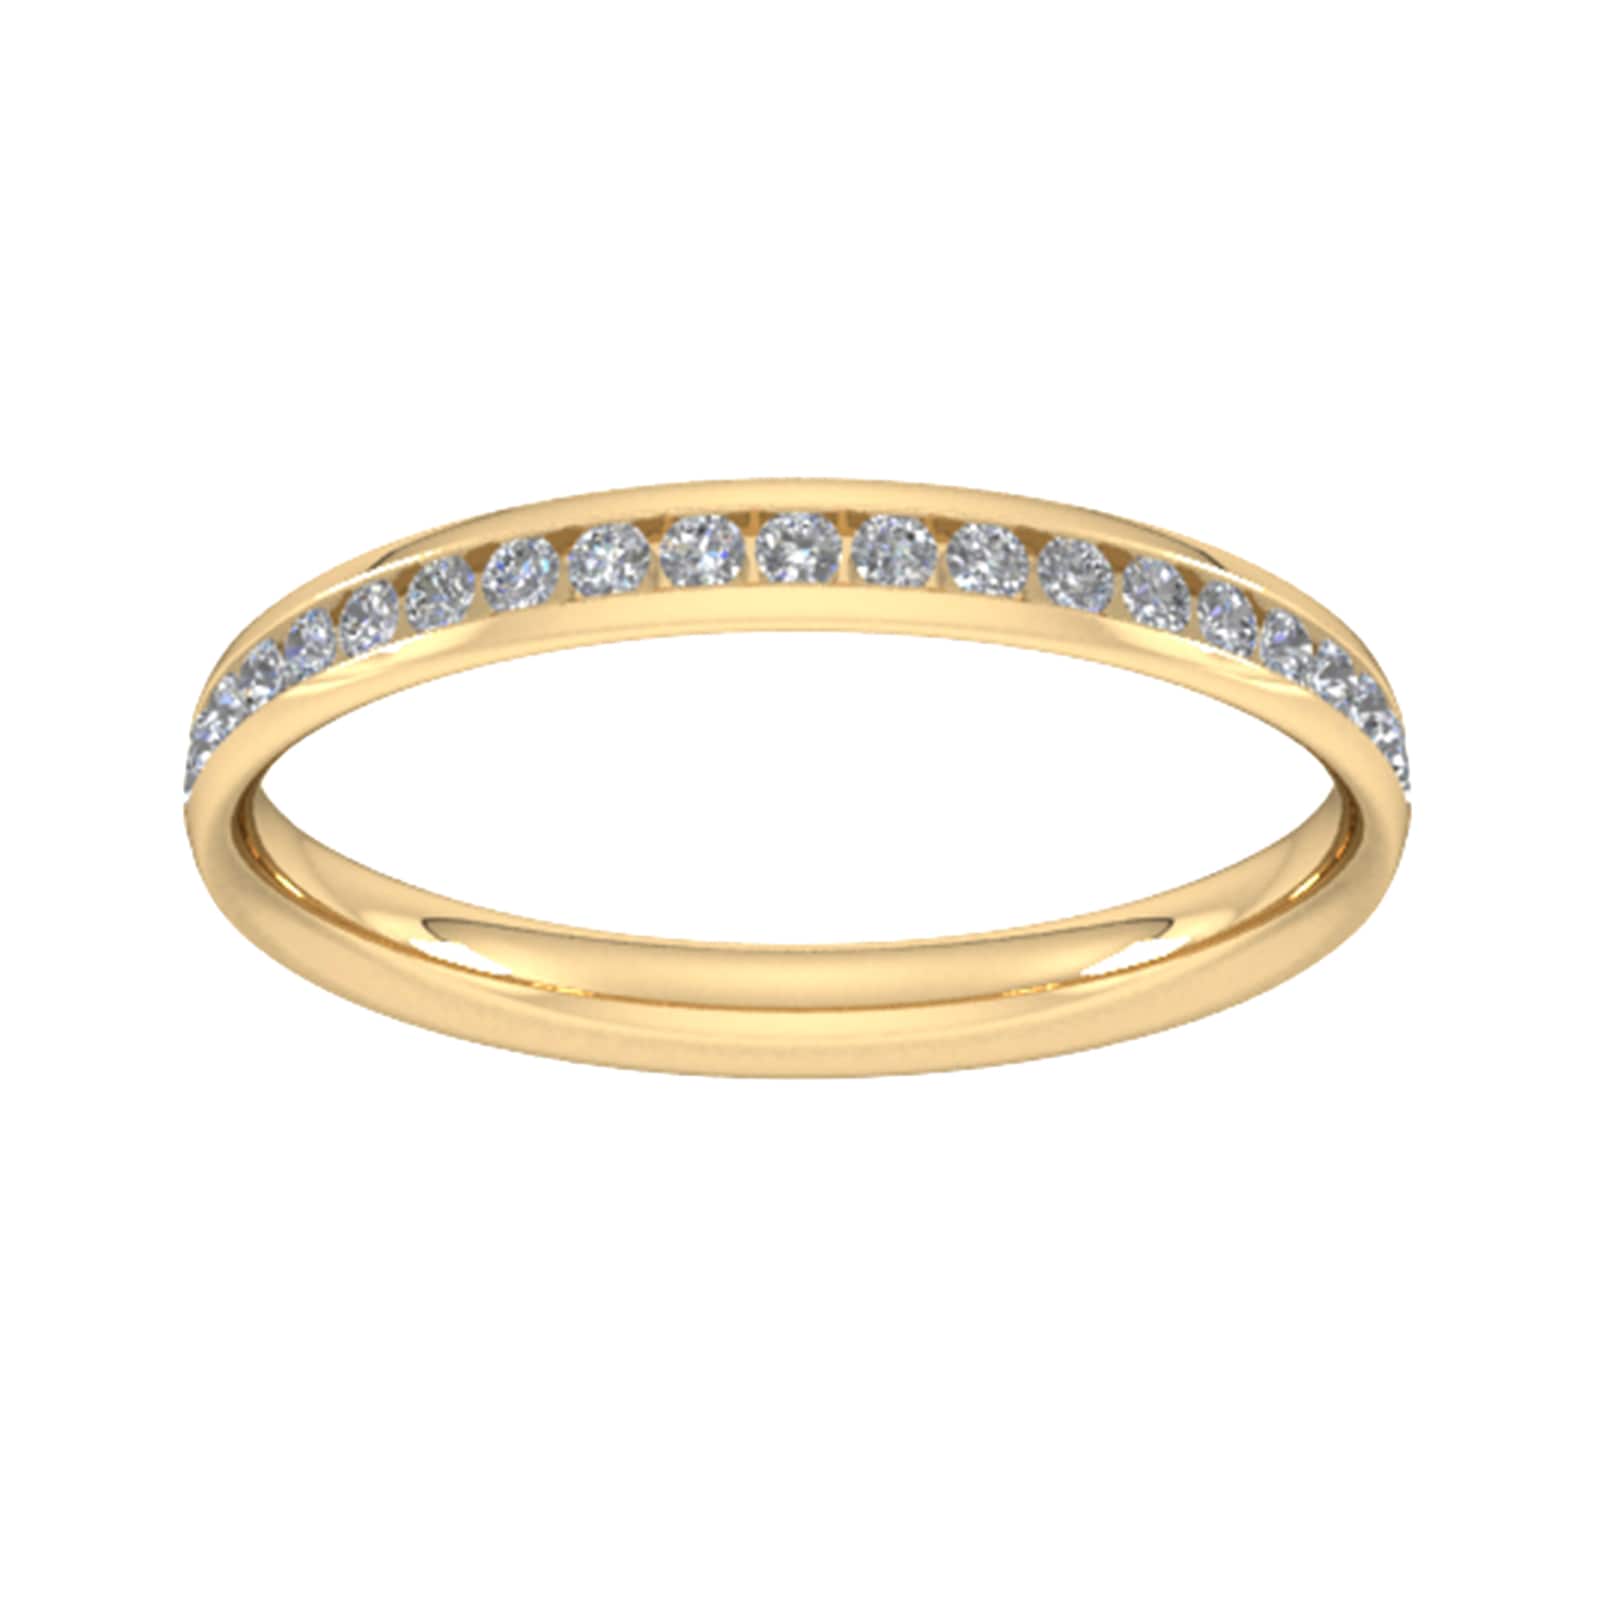 0.21 carat total weight half channel set brilliant cut diamond wedding ring in 9 carat yellow gold - ring size l